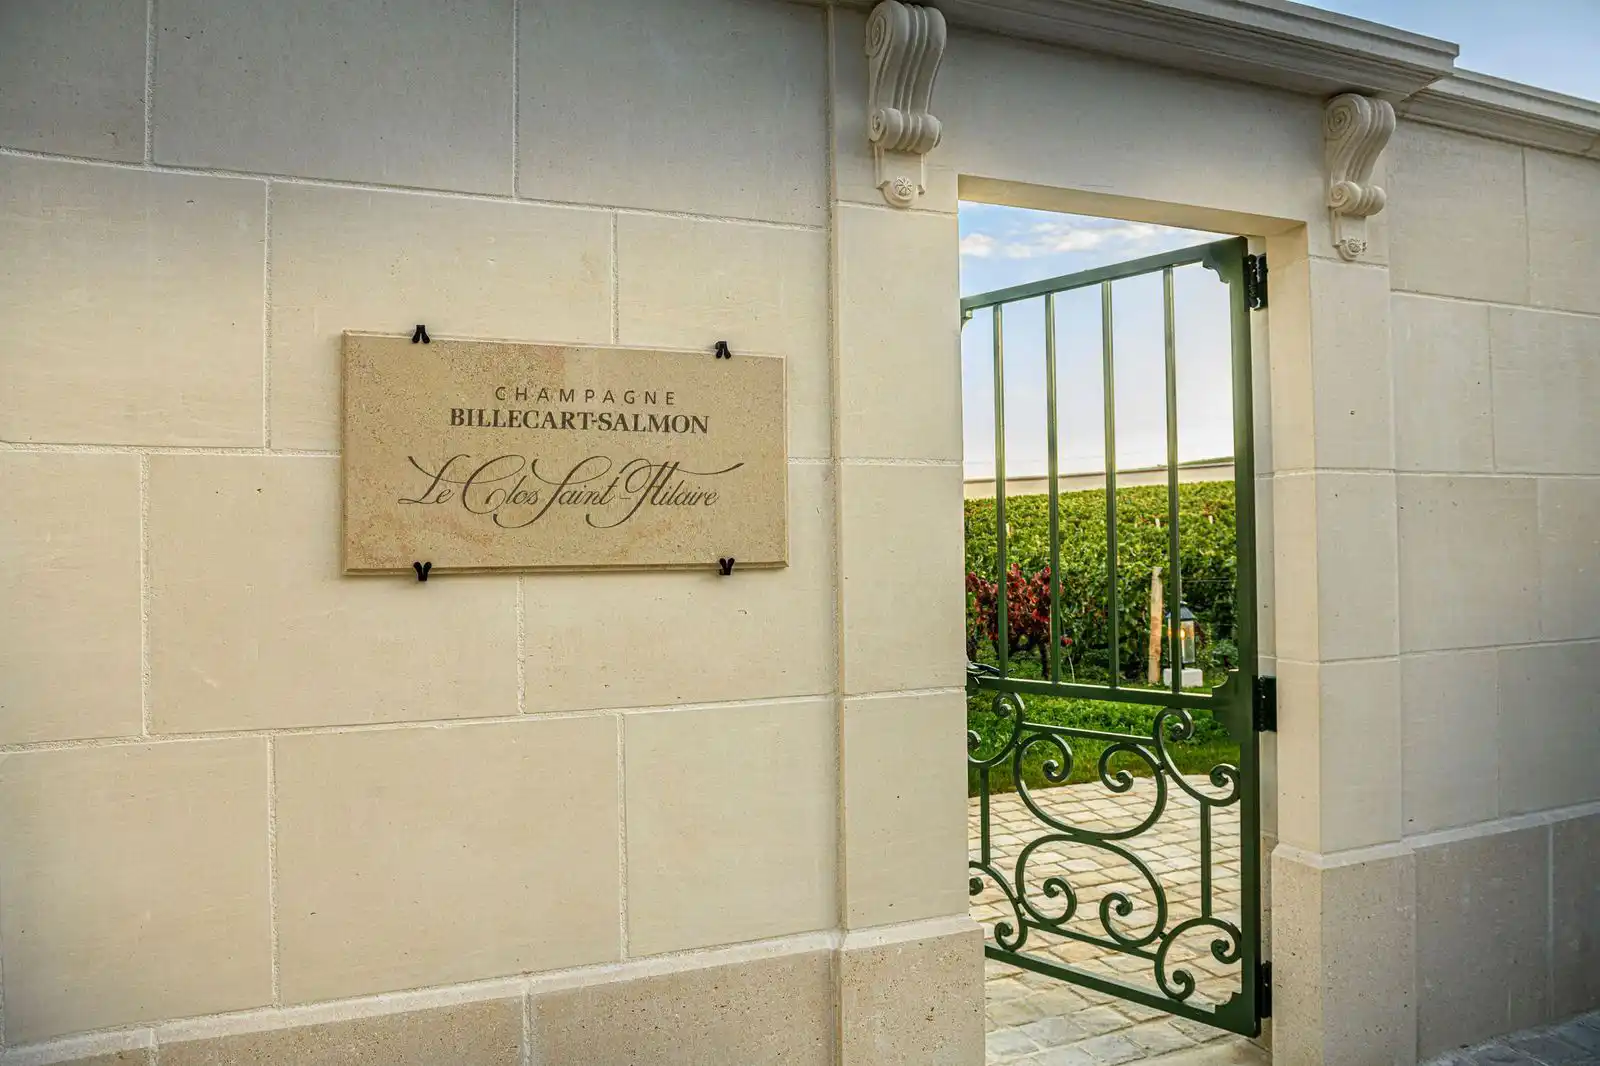 the entrance of one of the estate rooms of VistaJet partners champagne-billecart-salmon